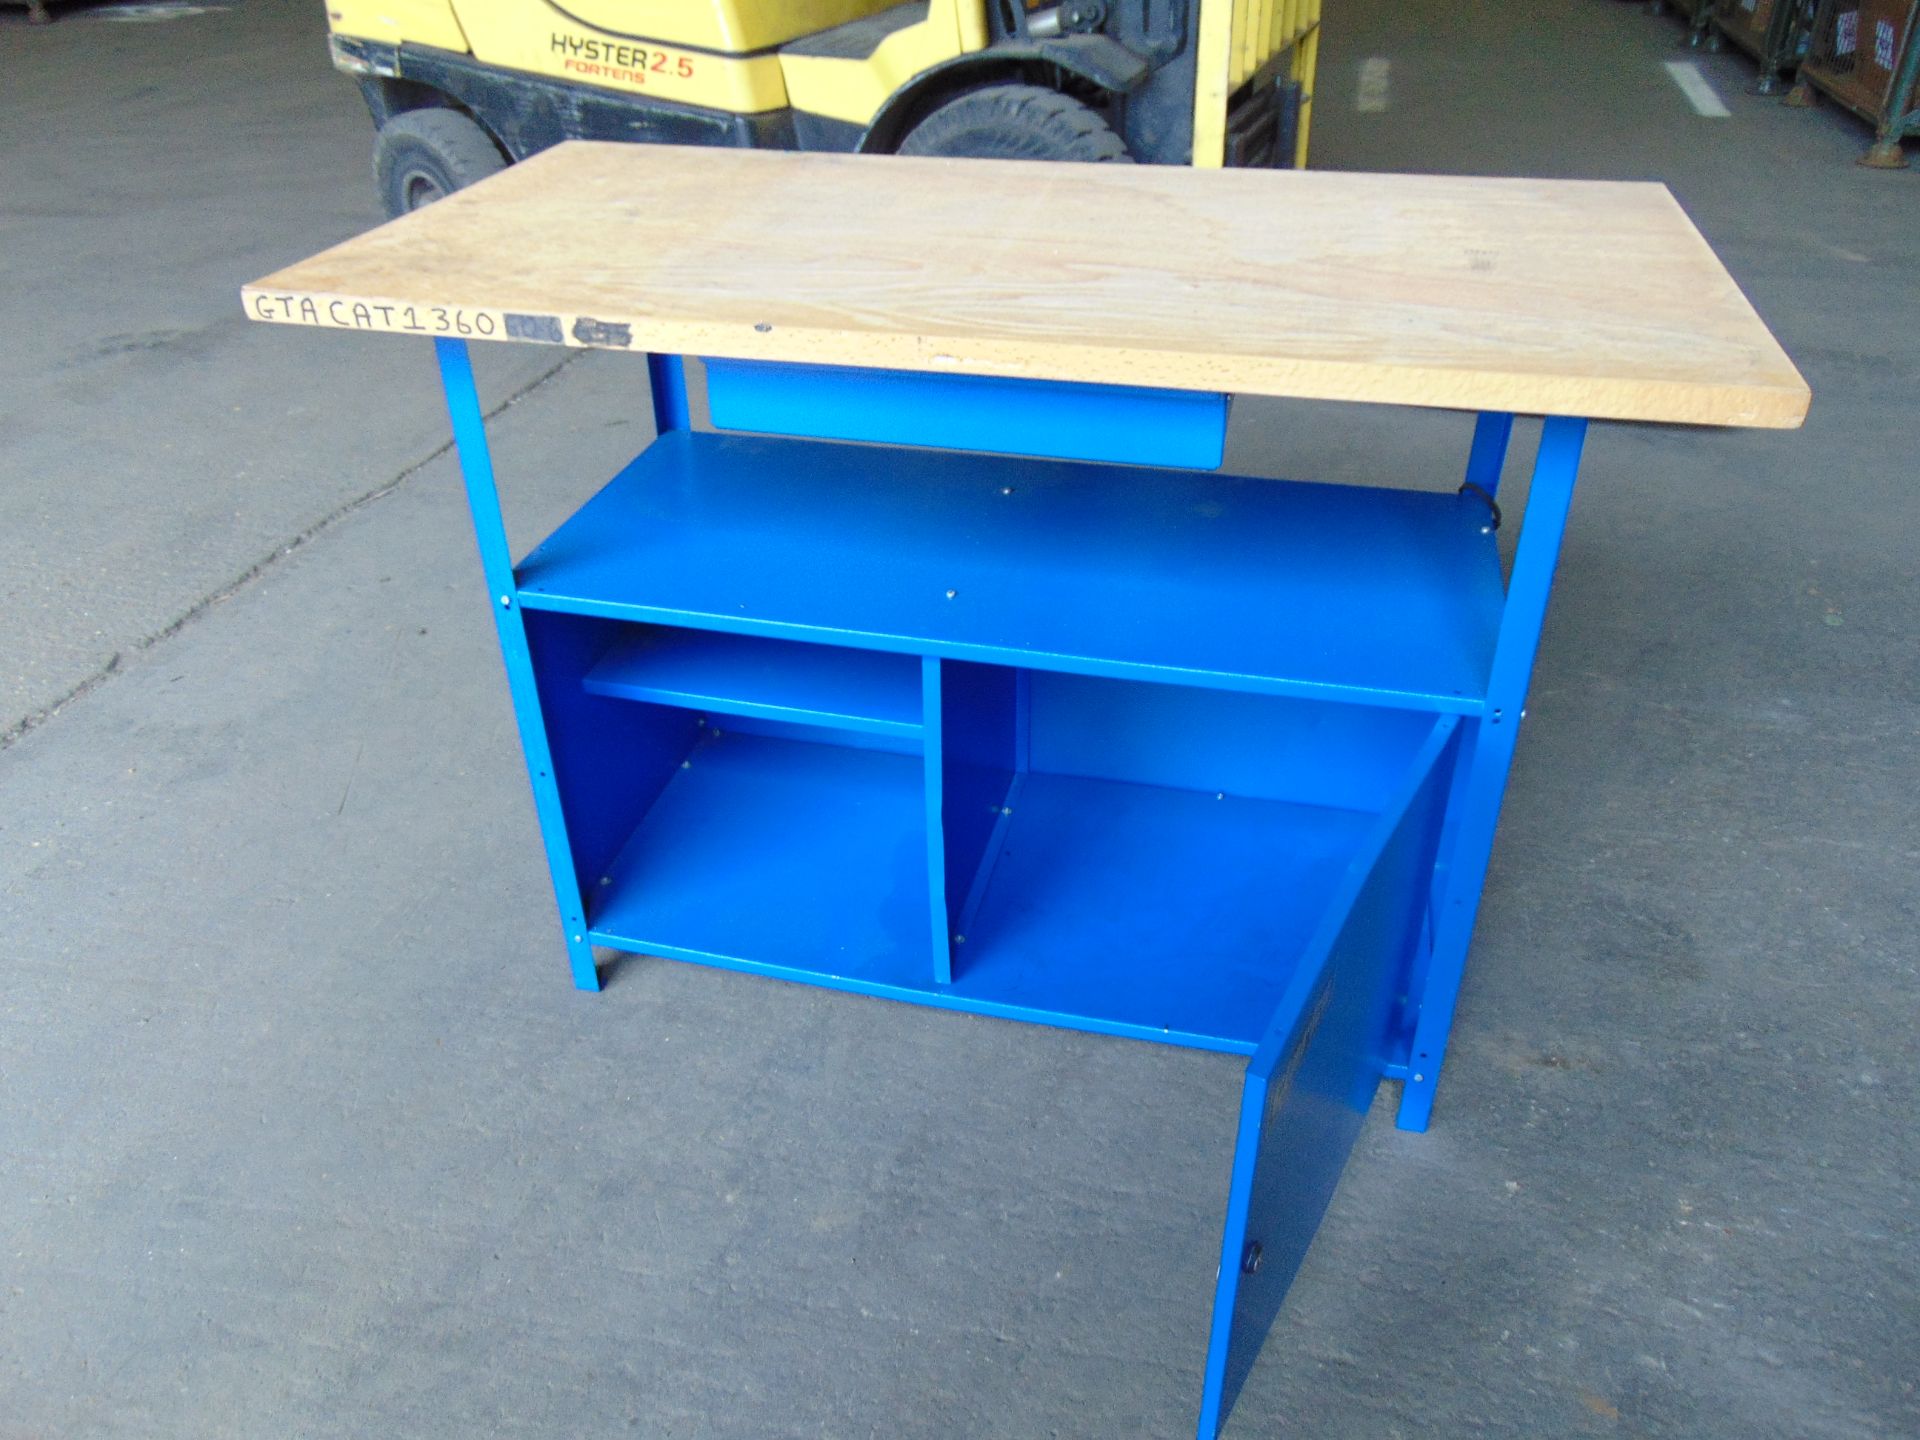 Clarke Workshop Bench c/w Cupboard ad Draws Wooden Top as new from MoD - Image 3 of 4